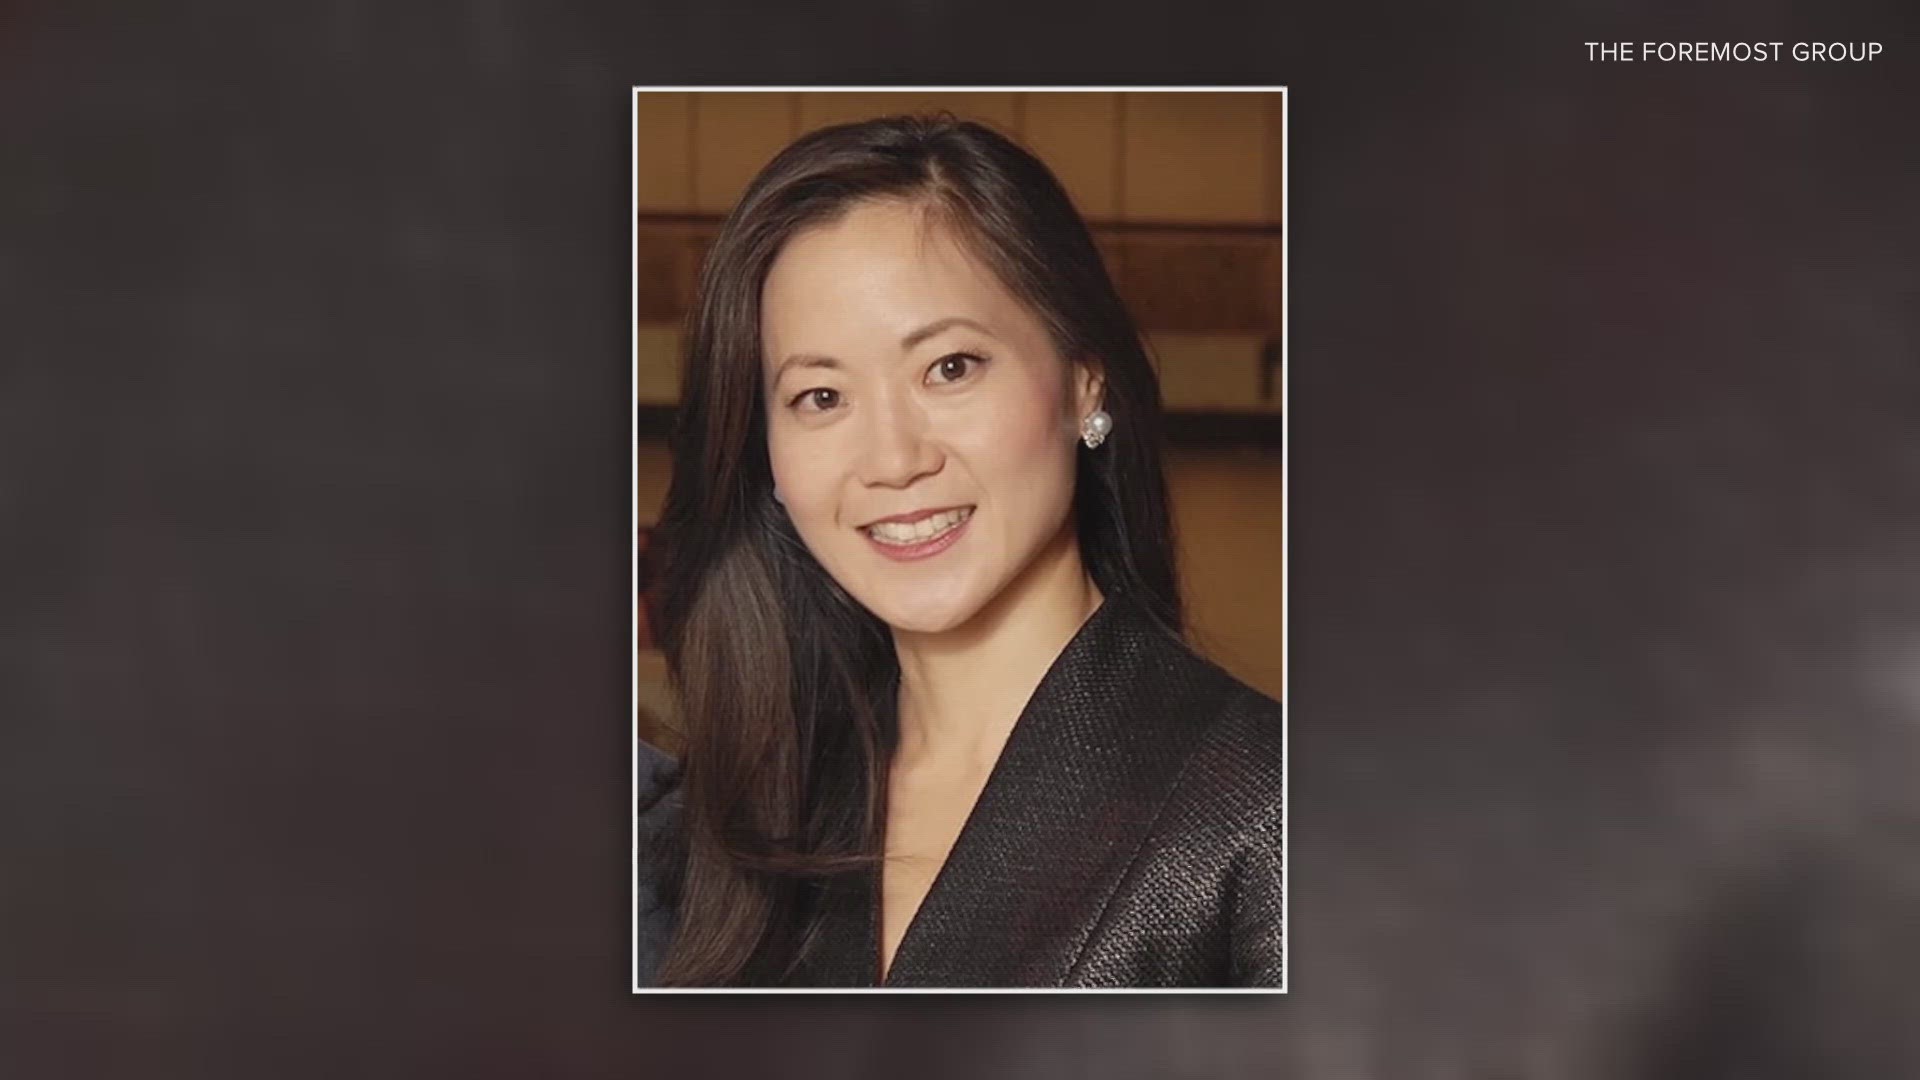 Angela Chao, a shipping industry CEO and sister-in-law to Senate Minority Leader Mitch McConnell, was intoxicated when she drove into a pond and died last month.